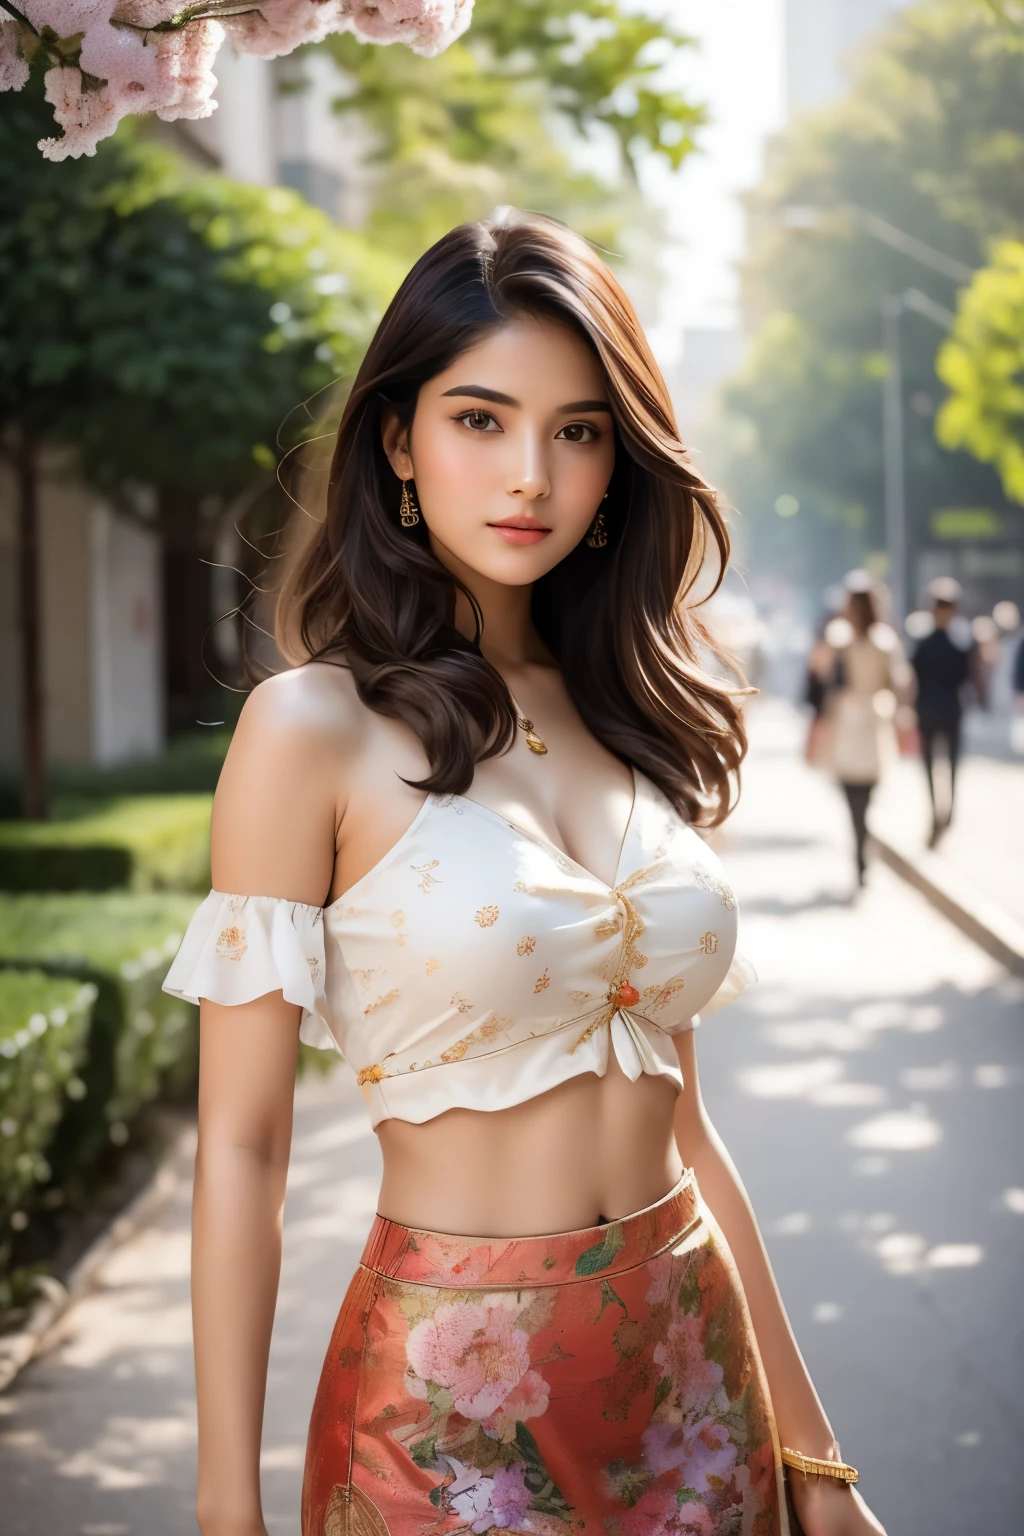 A stunning Indian teen top model, gracefully posing in the heart of a bustling city during the vibrant spring season. Dressed in a chic outfit that exudes elegance and sophistication, she wears a white cotton bolero, accentuating her slender shoulders and collarbones. Her top, inspired by the classic style of John Singer Sargent or Ishitaka Amano, features a deep neckline that hints at her toned midriff, drawing attention to her alluring figure. The paisley pencil skirt, reminiscent of the work of Alexandre-Jacques Chantron or William-Adolphe Bouguereau, perfectly complements her top, accentuating her hourglass silhouette. Accessorized with fashionable jewelry, stylish sunglasses, and a headband, she exudes confidence and poise. The background of the image reveals the urban landscape, with towering buildings, lush greenery, and blooming cherry blossom trees in the distance, creating a serene yet lively atmosphere. The model is expertly captured on a Hasselblad X1D II camera, showcasing her flawless skin tone and radiant beauty in high-definition clarity. The overall composition and lighting of the photo evoke the timeless elegance of Auguste Renoir or Paul Peel, while also incorporating modern elements, such as the cityscape and contemporary fashion. The image is reminiscent of the works of John William Waterhouse, Han-Wu Shen, Kei Mieno, Ikushima Hiroshi, Chakrapan Posayakrit, Kim Jung Gi, and WLOP, yet maintains its unique and captivating style.